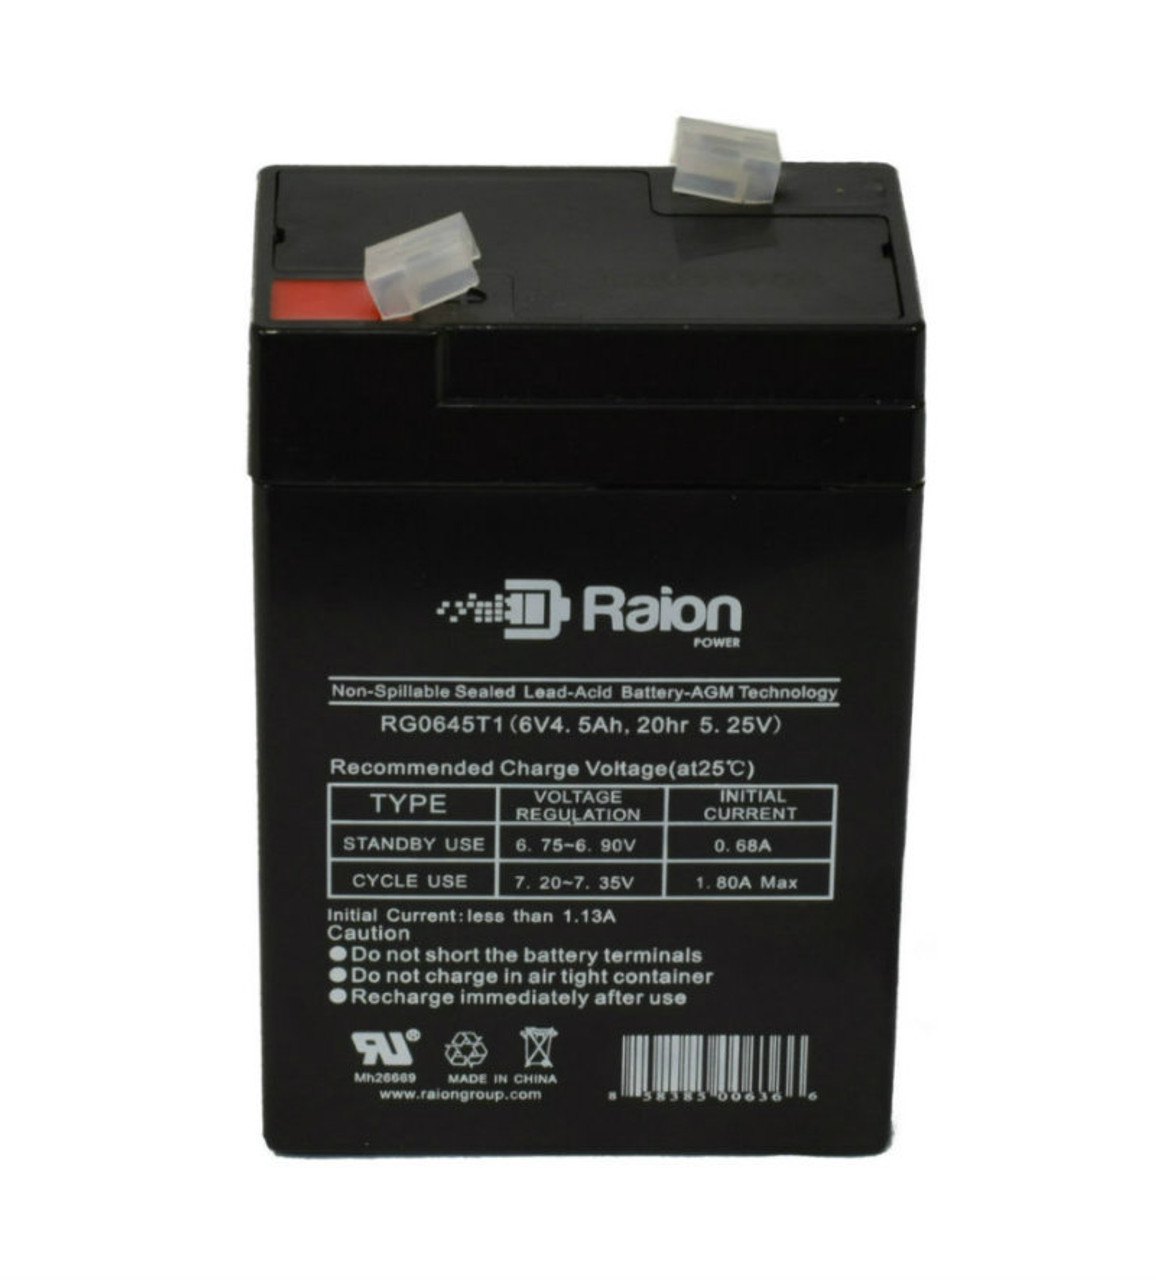 Raion Power RG0645T1 Replacement Battery Cartridge for Light Alarms 2DM3